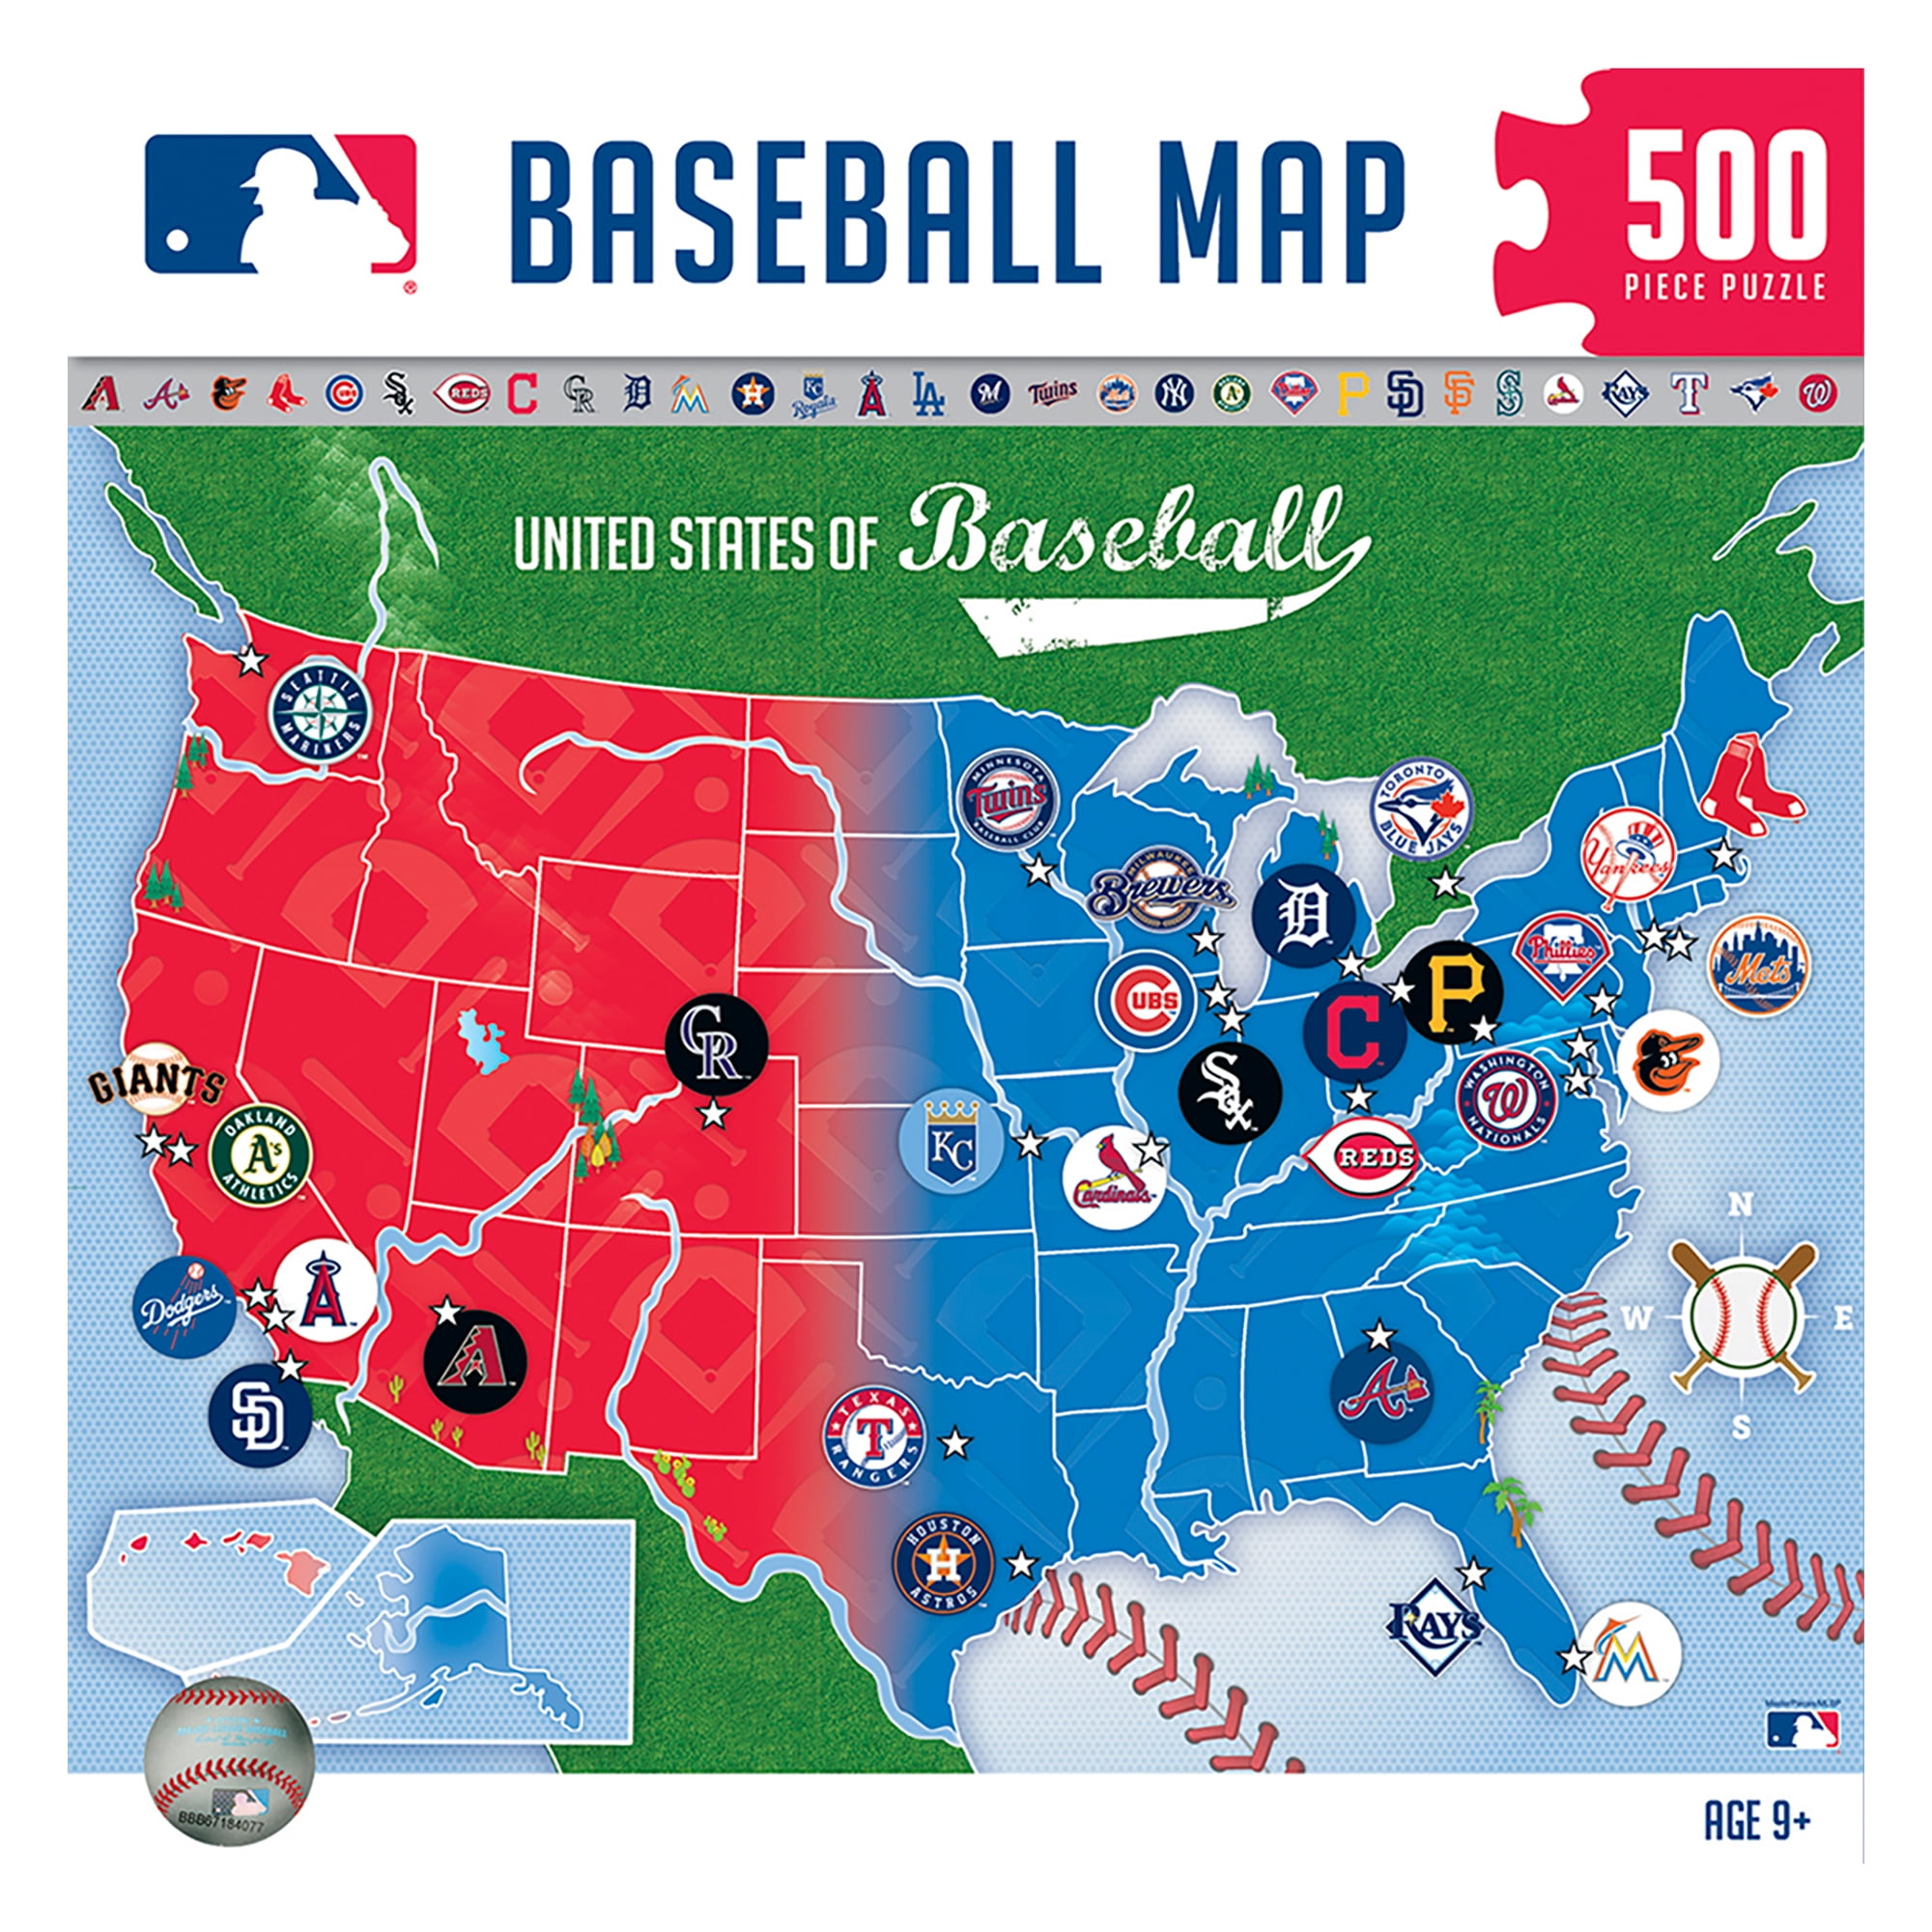 Facebook Map Shows CountybyCounty Breakdown of Most Liked MLB Teams   News Scores Highlights Stats and Rumors  Bleacher Report